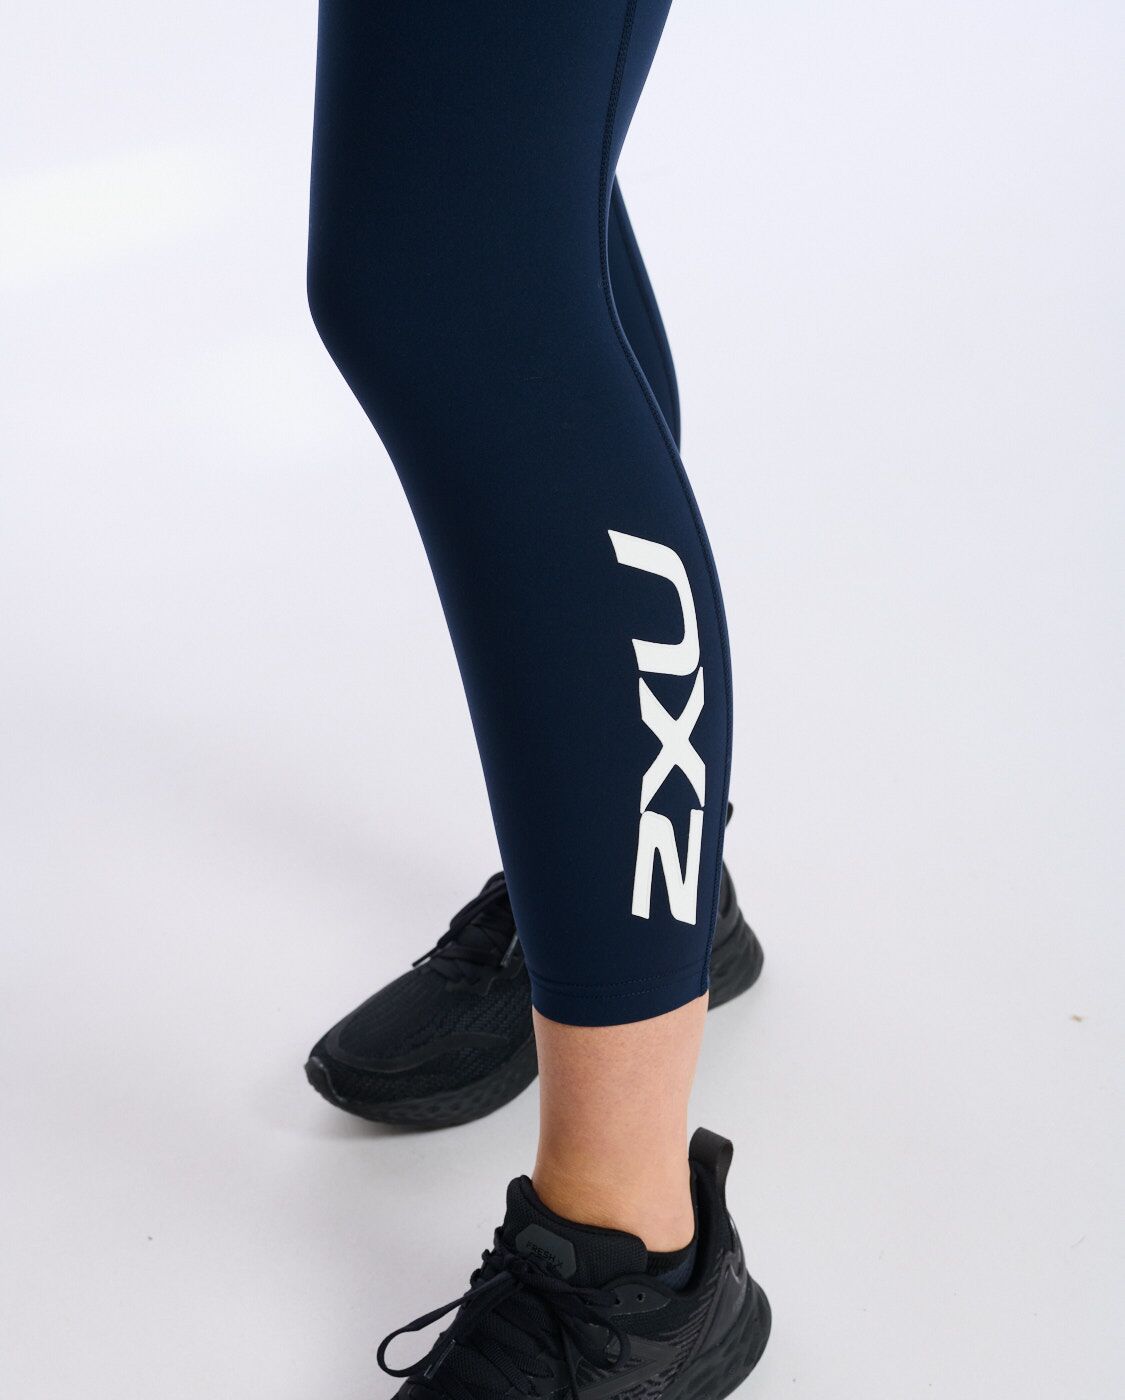 2XU South Africa - Womens Form Stash Hi-Rise Compression 7/8 Tights - Midnight/White